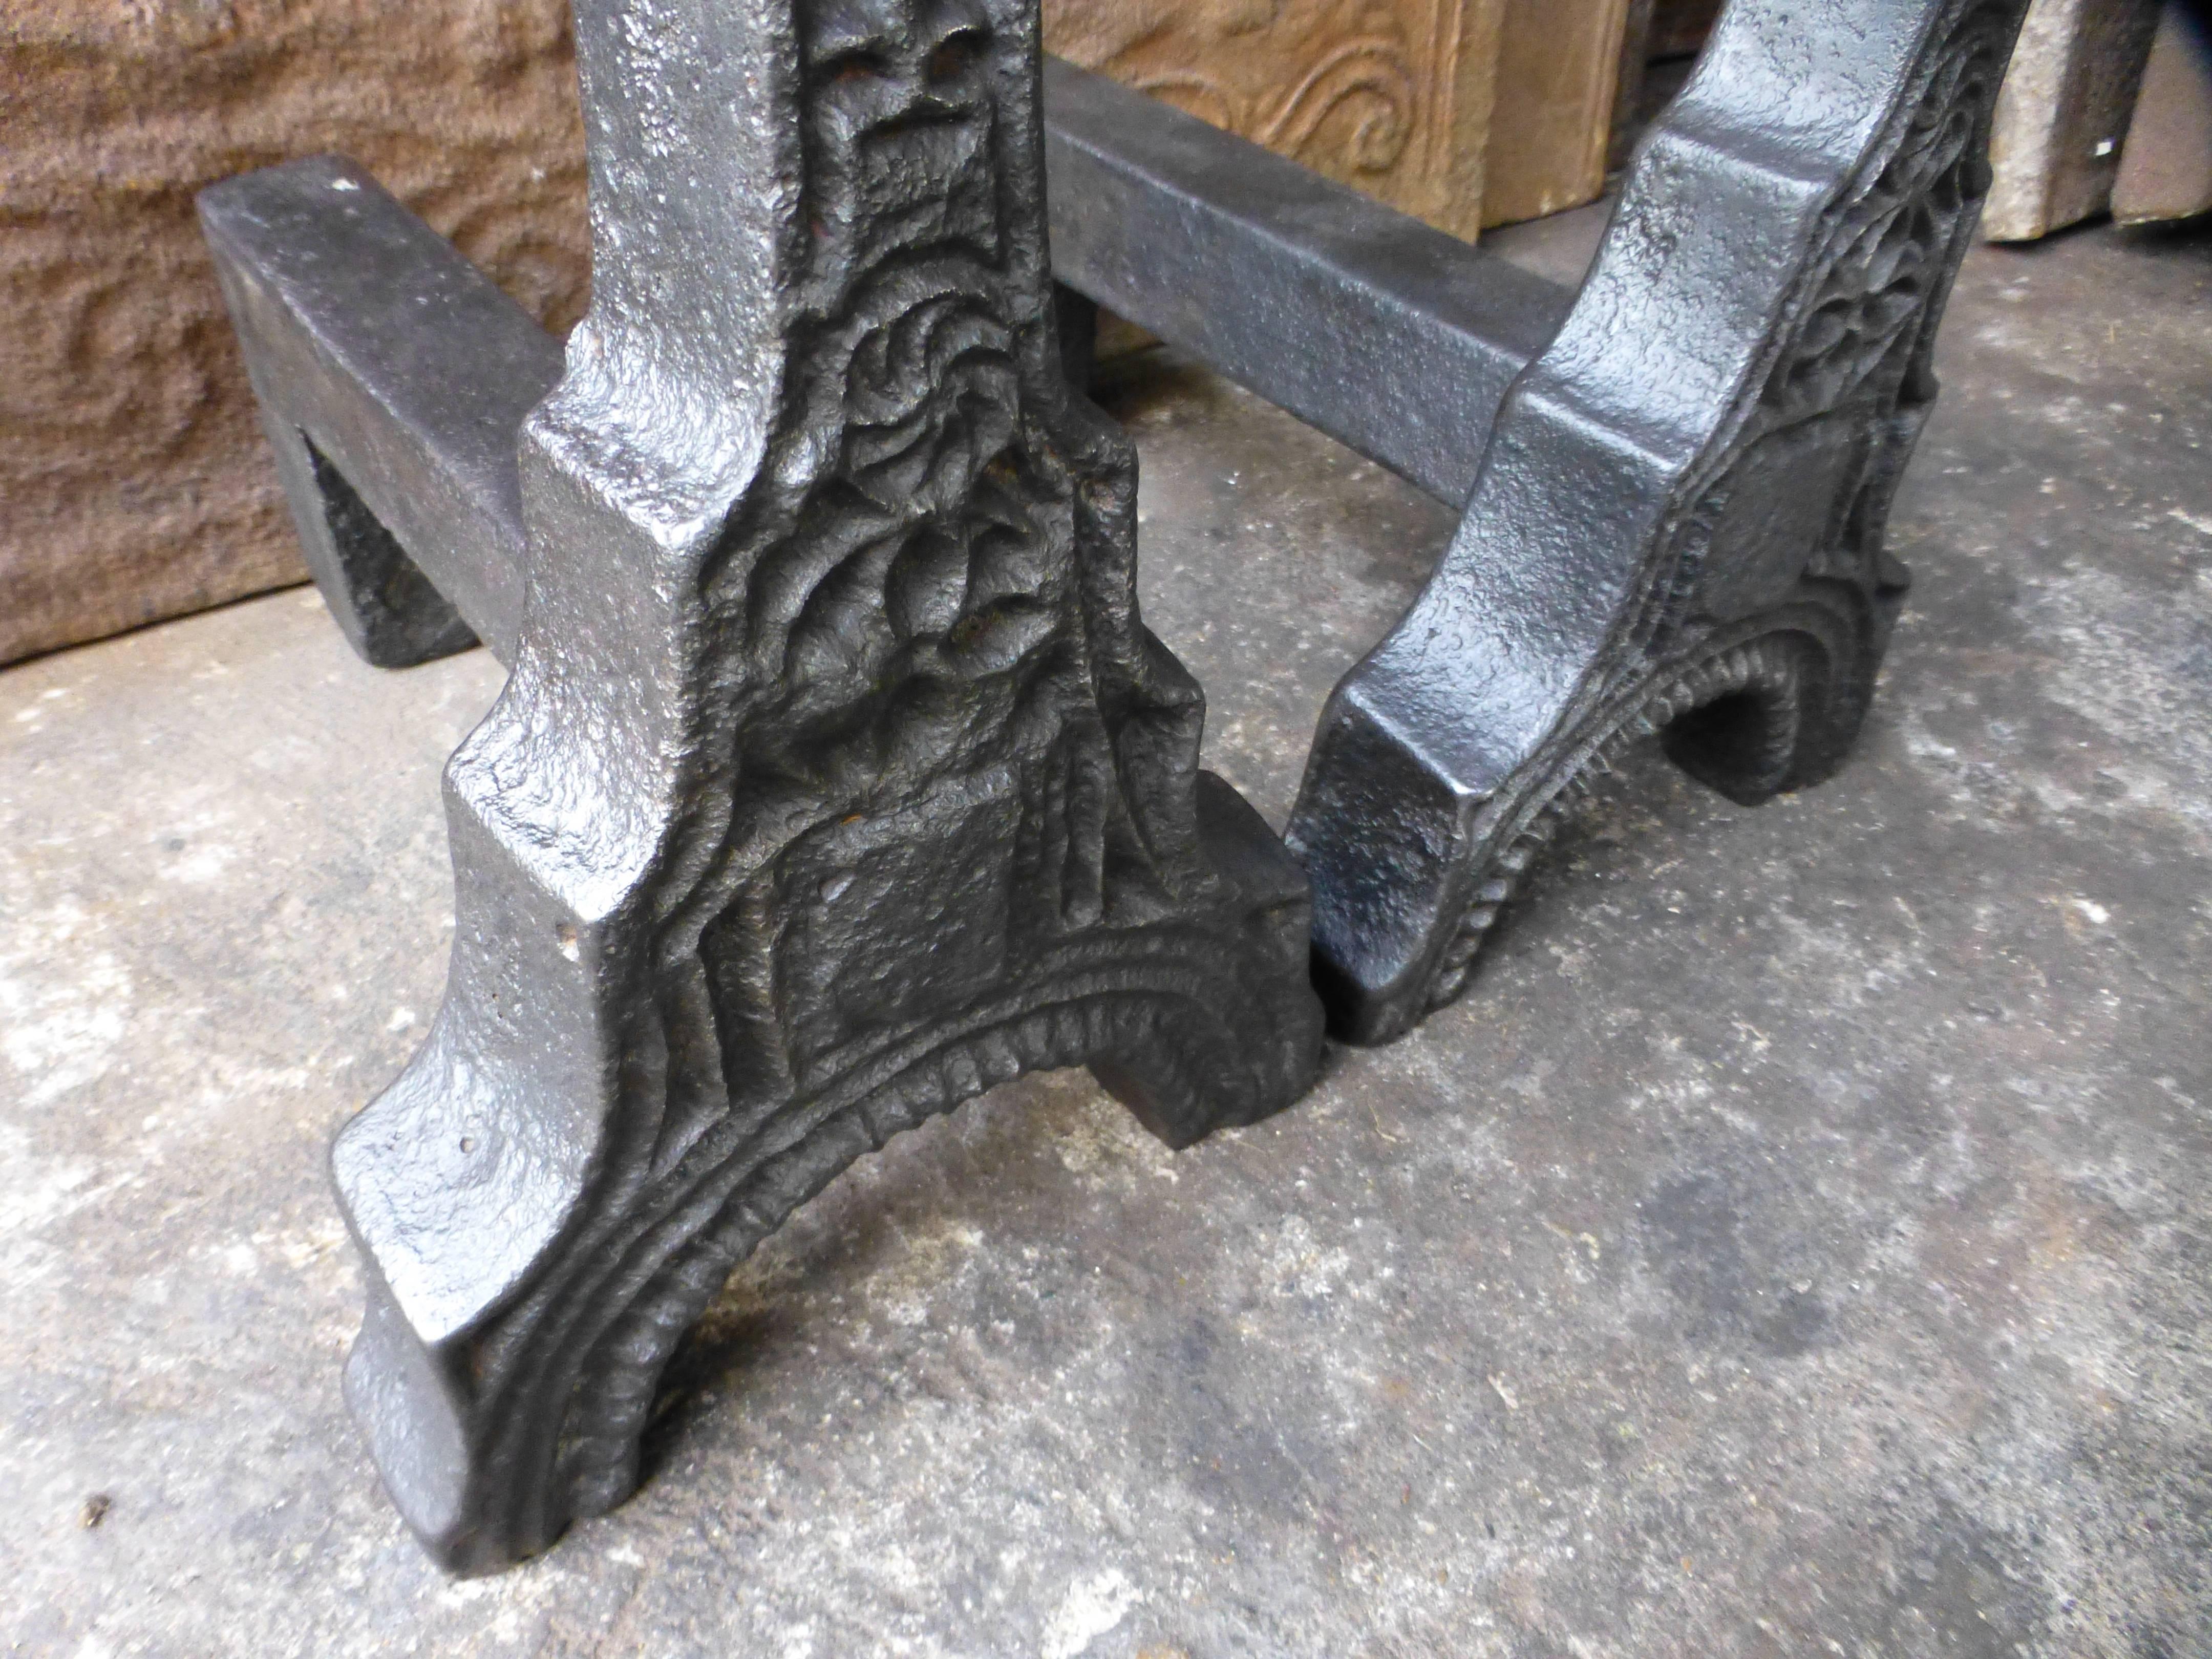 Exceptional pair of cast iron Gothic andirons.

We have a unique and specialized collection of antique and used fireplace accessories consisting of more than 1000 listings at 1stdibs. Amongst others, we always have 300+ firebacks, 250+ pairs of